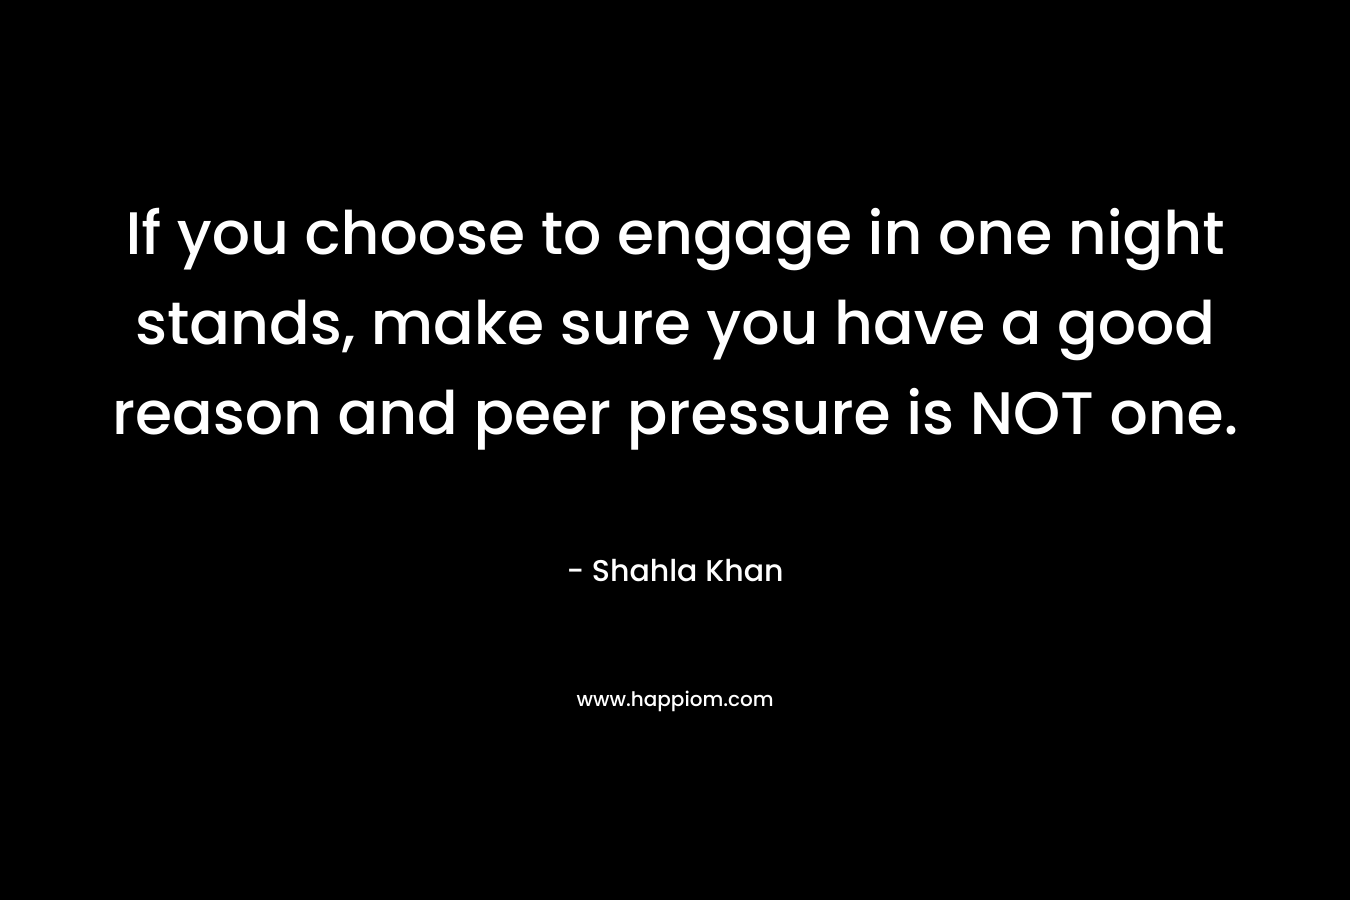 If you choose to engage in one night stands, make sure you have a good reason and peer pressure is NOT one. – Shahla Khan